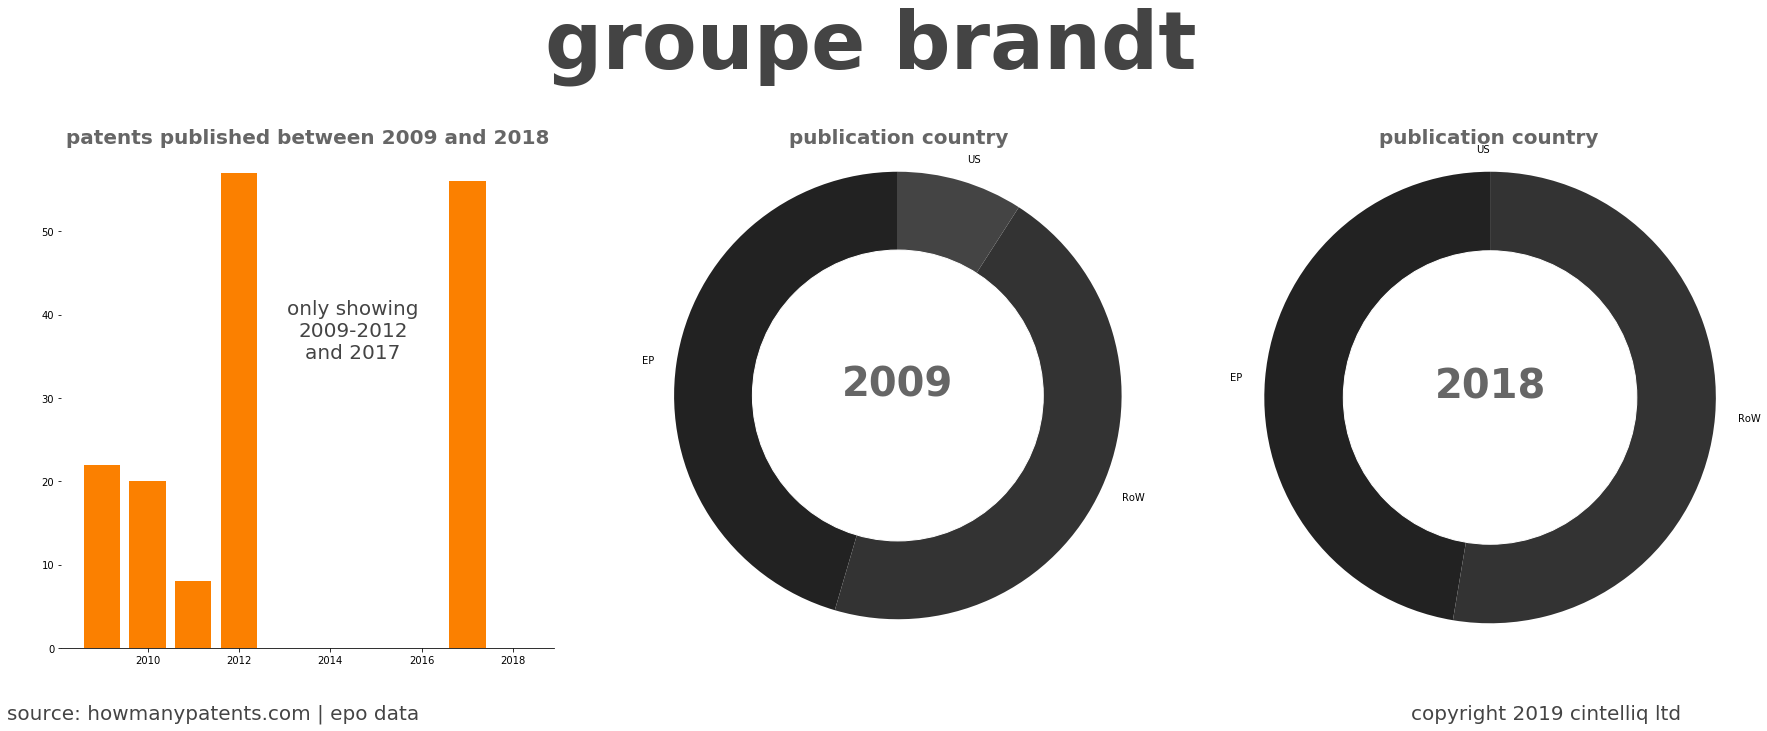 summary of patents for Groupe Brandt